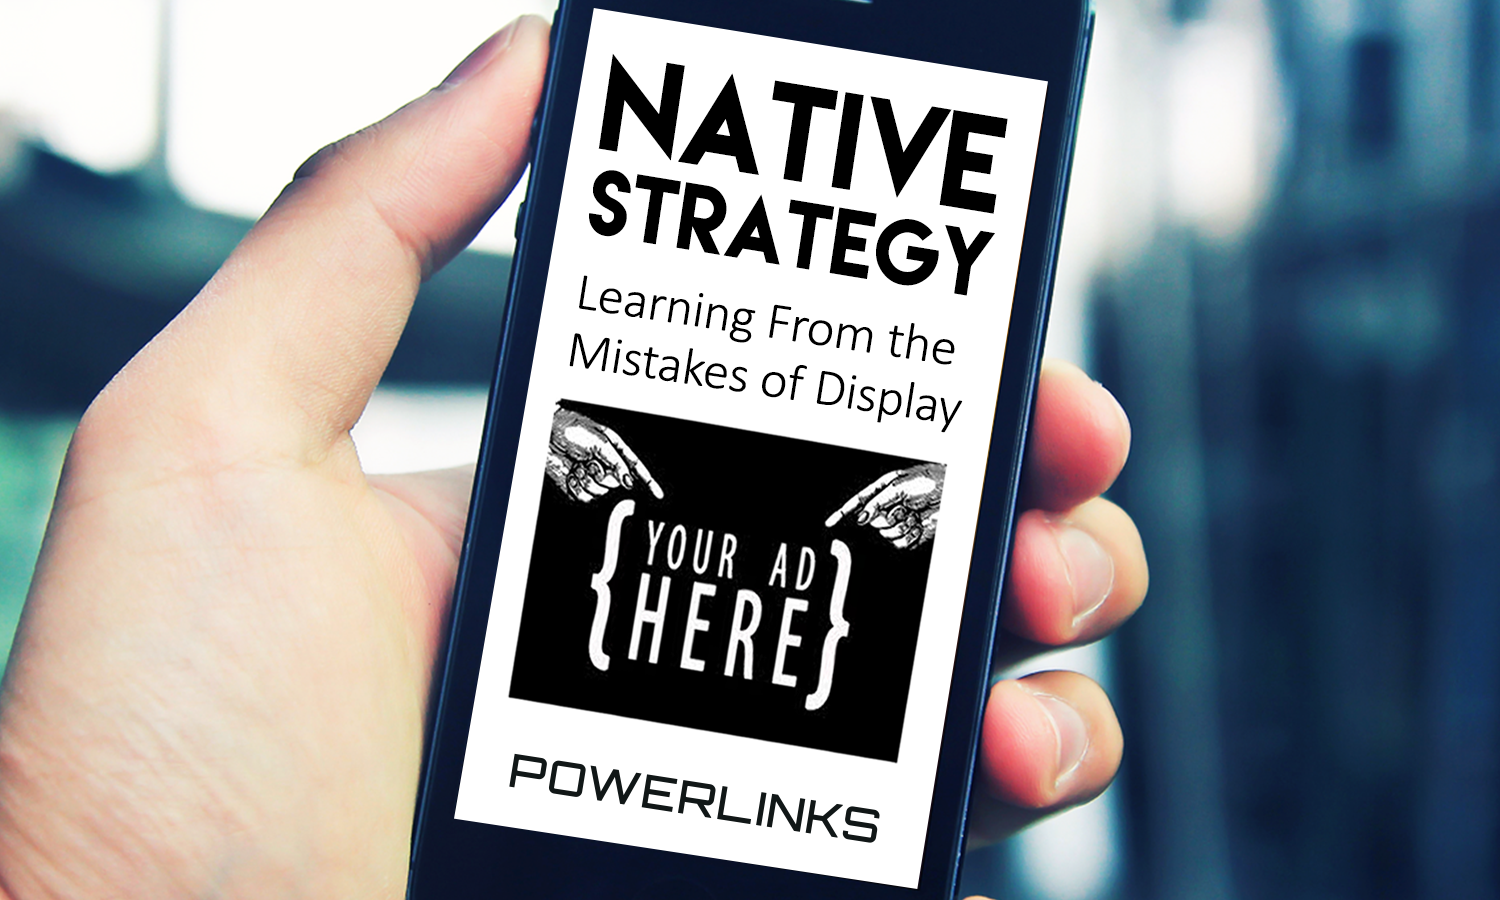 Native Strategy: Learning from the Mistakes of Display